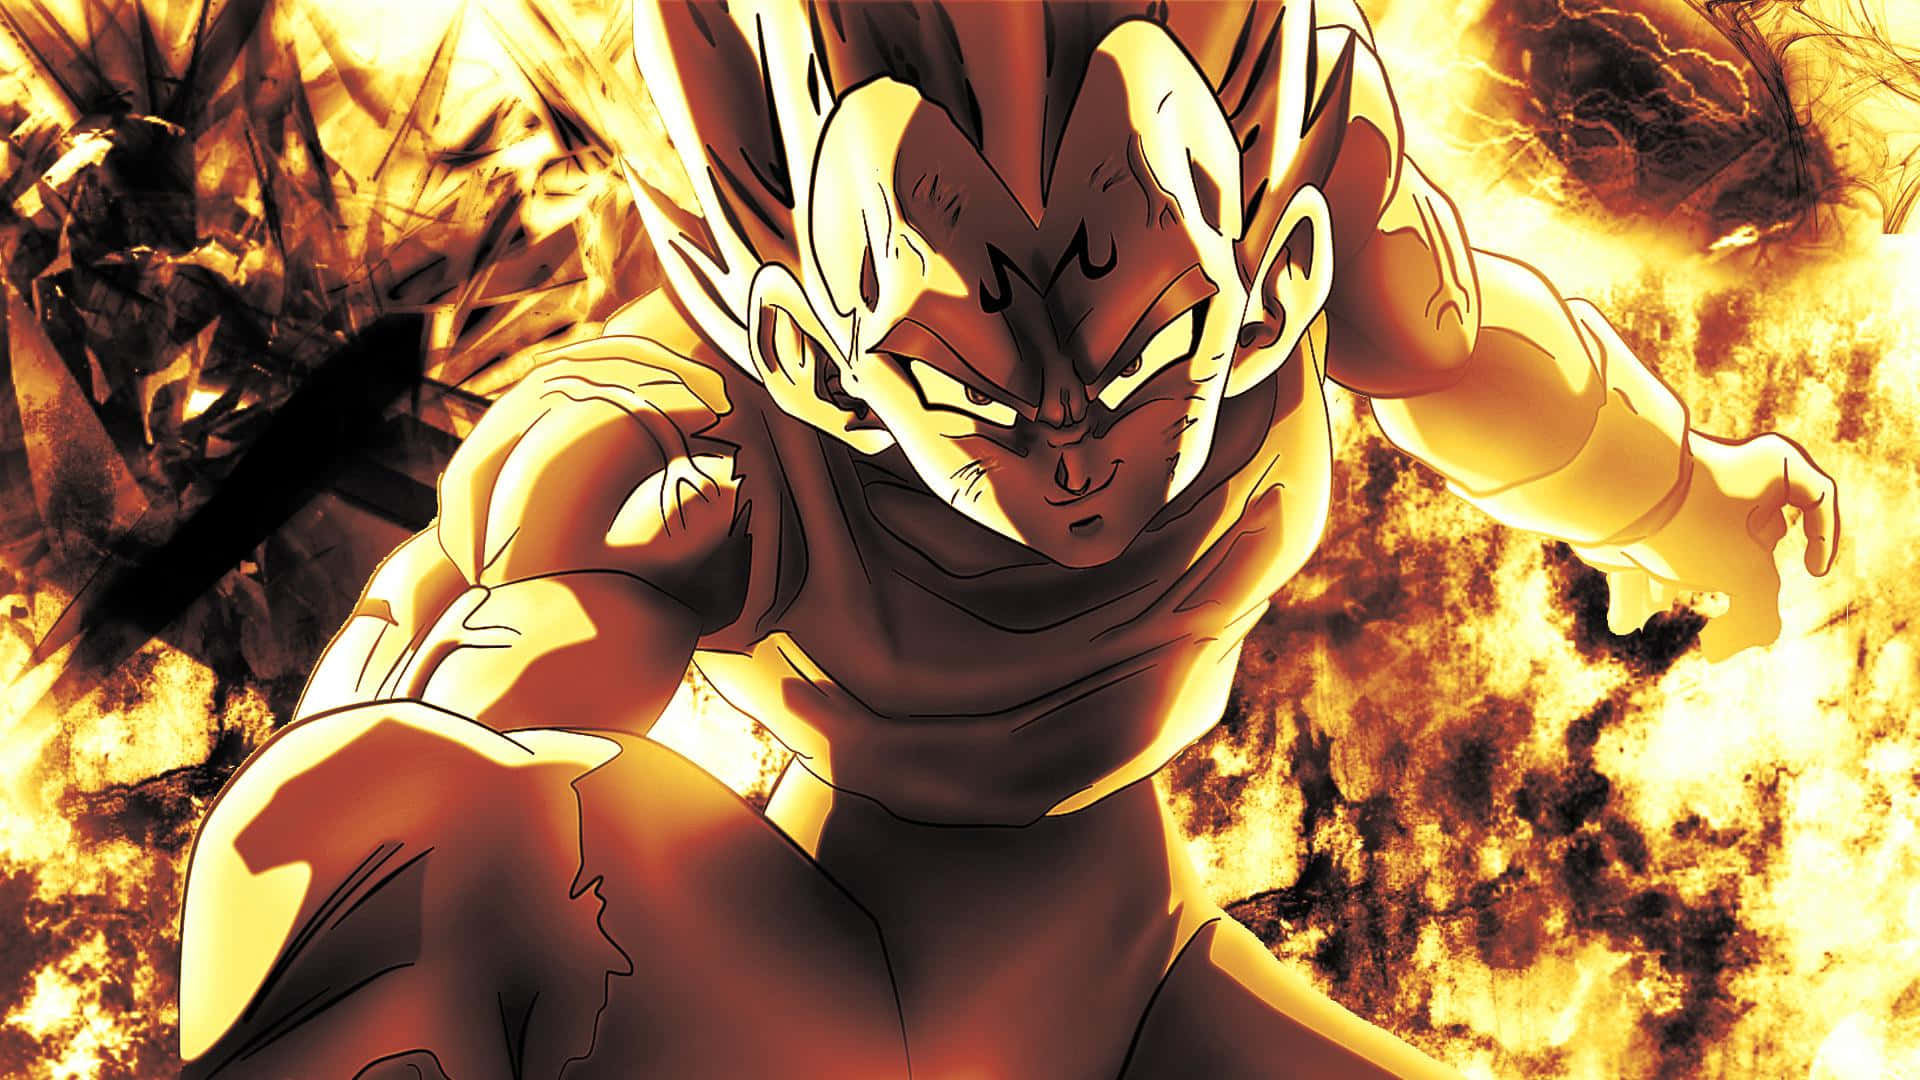 Bring Out the Saiyan Prince In You With Cool Vegeta Wallpaper